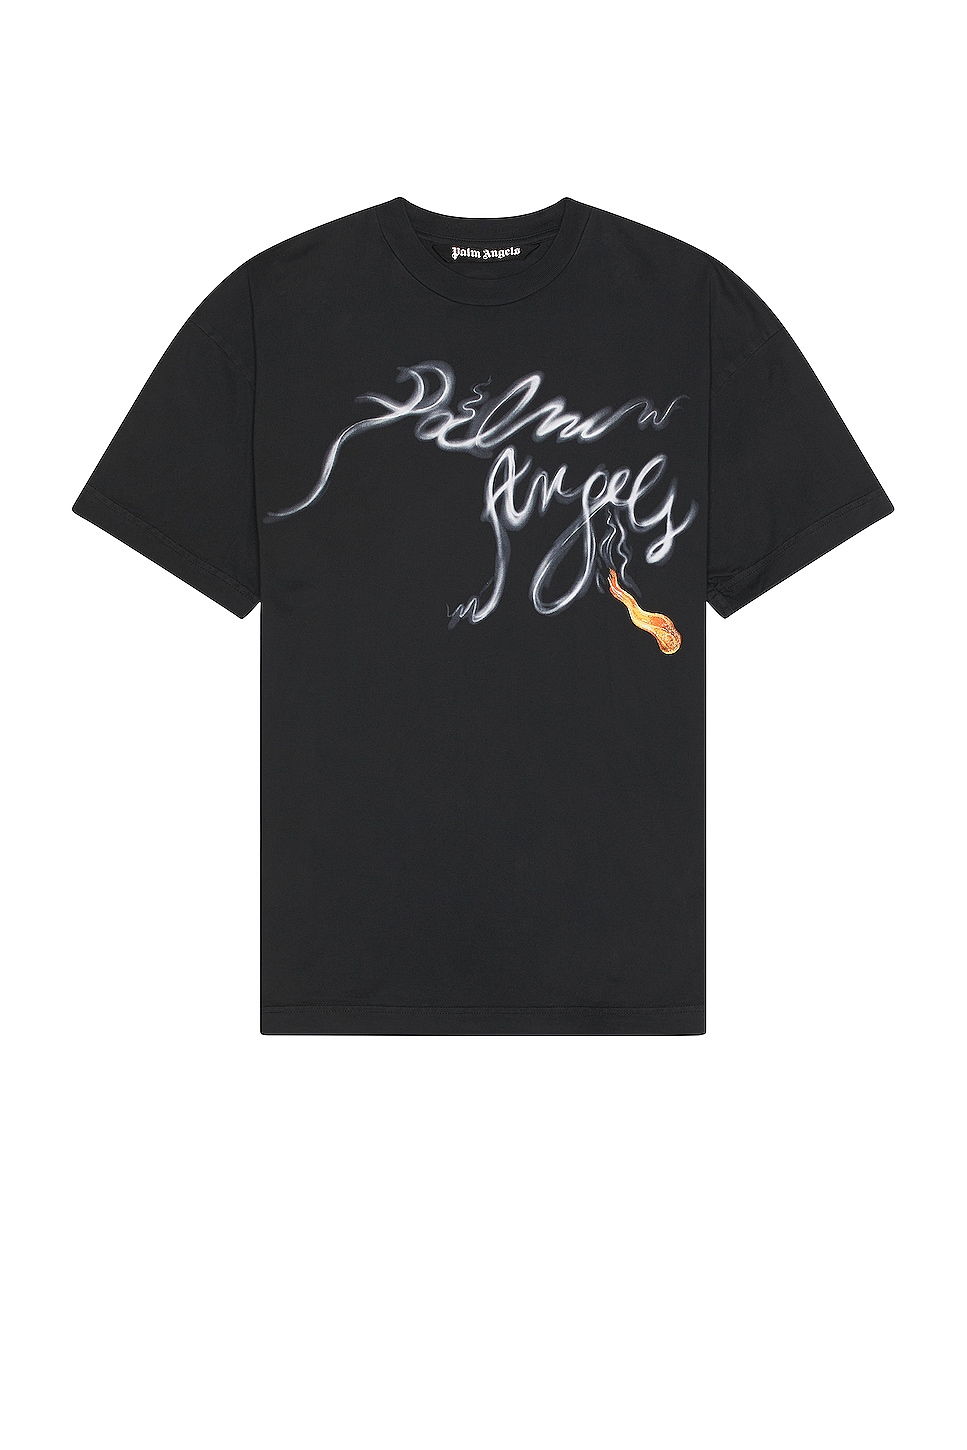 Image 1 of Palm Angels Foggy Pa Tee in Black & White